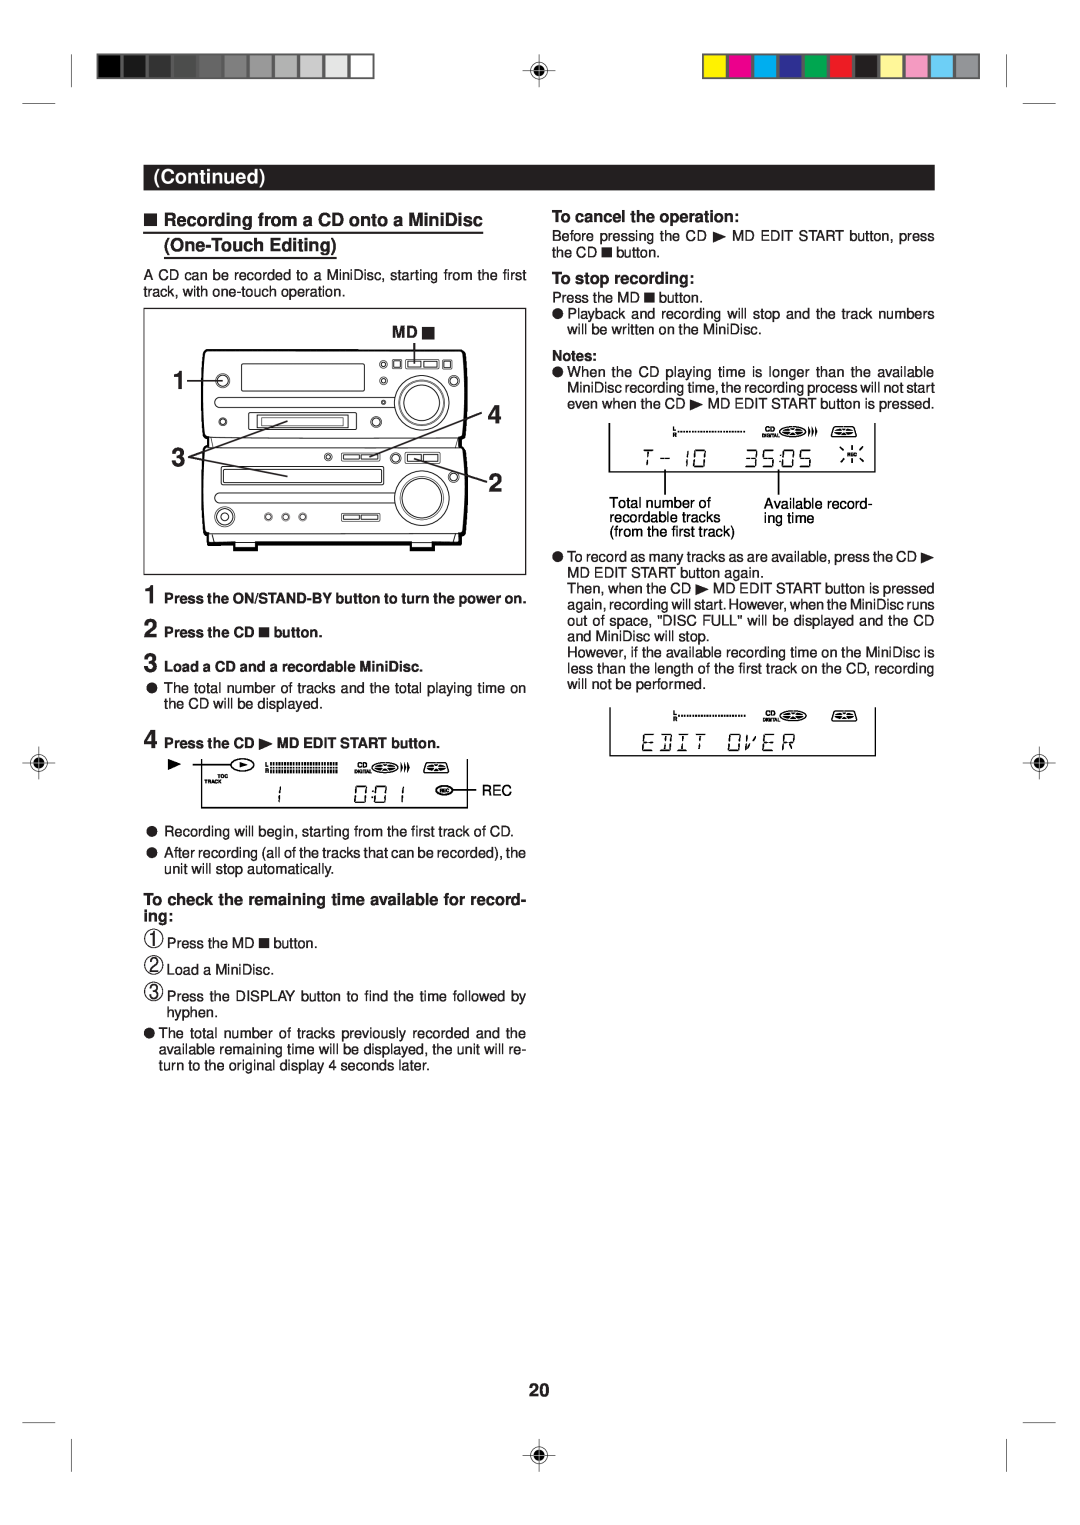 Sharp MD-MX10H operation manual To cancel the operation, To stop recording, Continued, Md H 